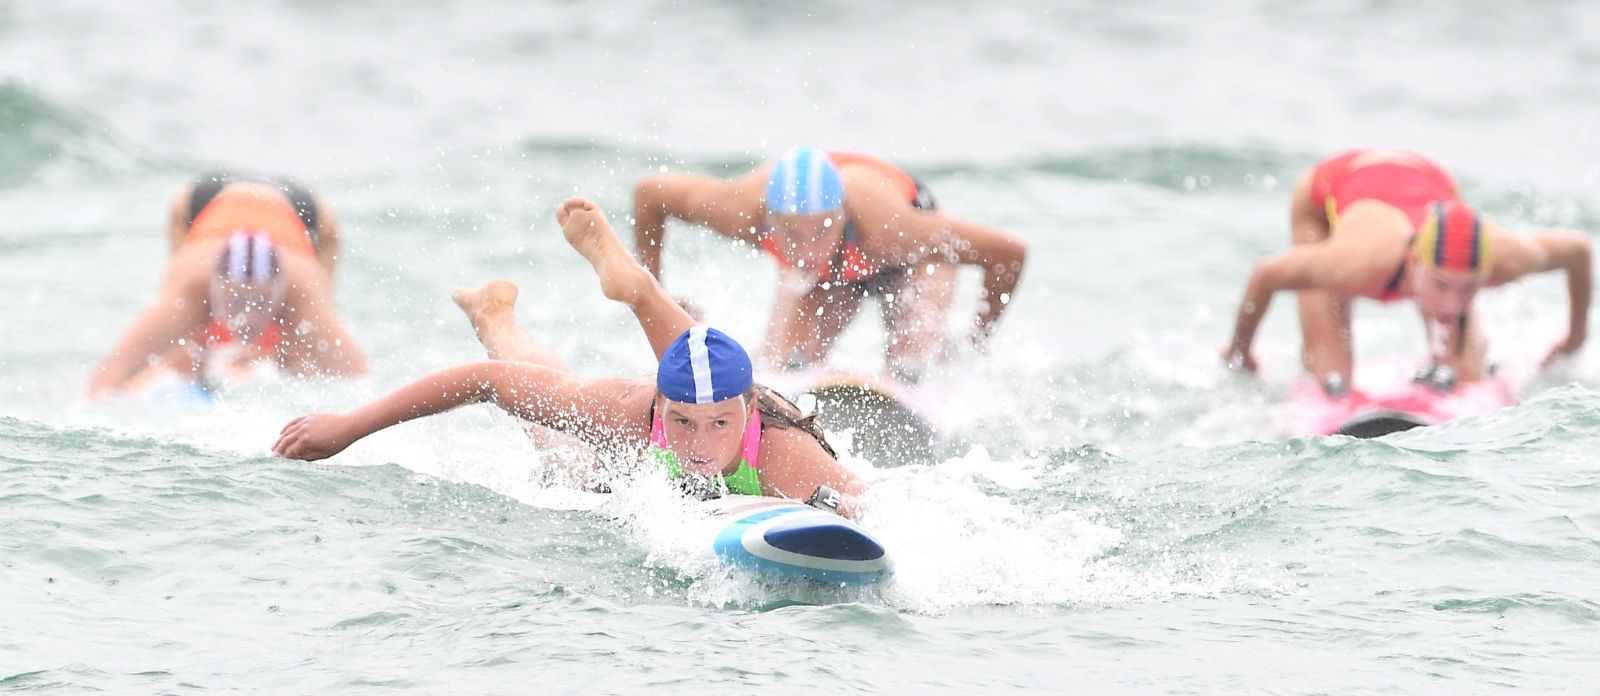 Super Surf Teams ready for fierce competition at North Bondi